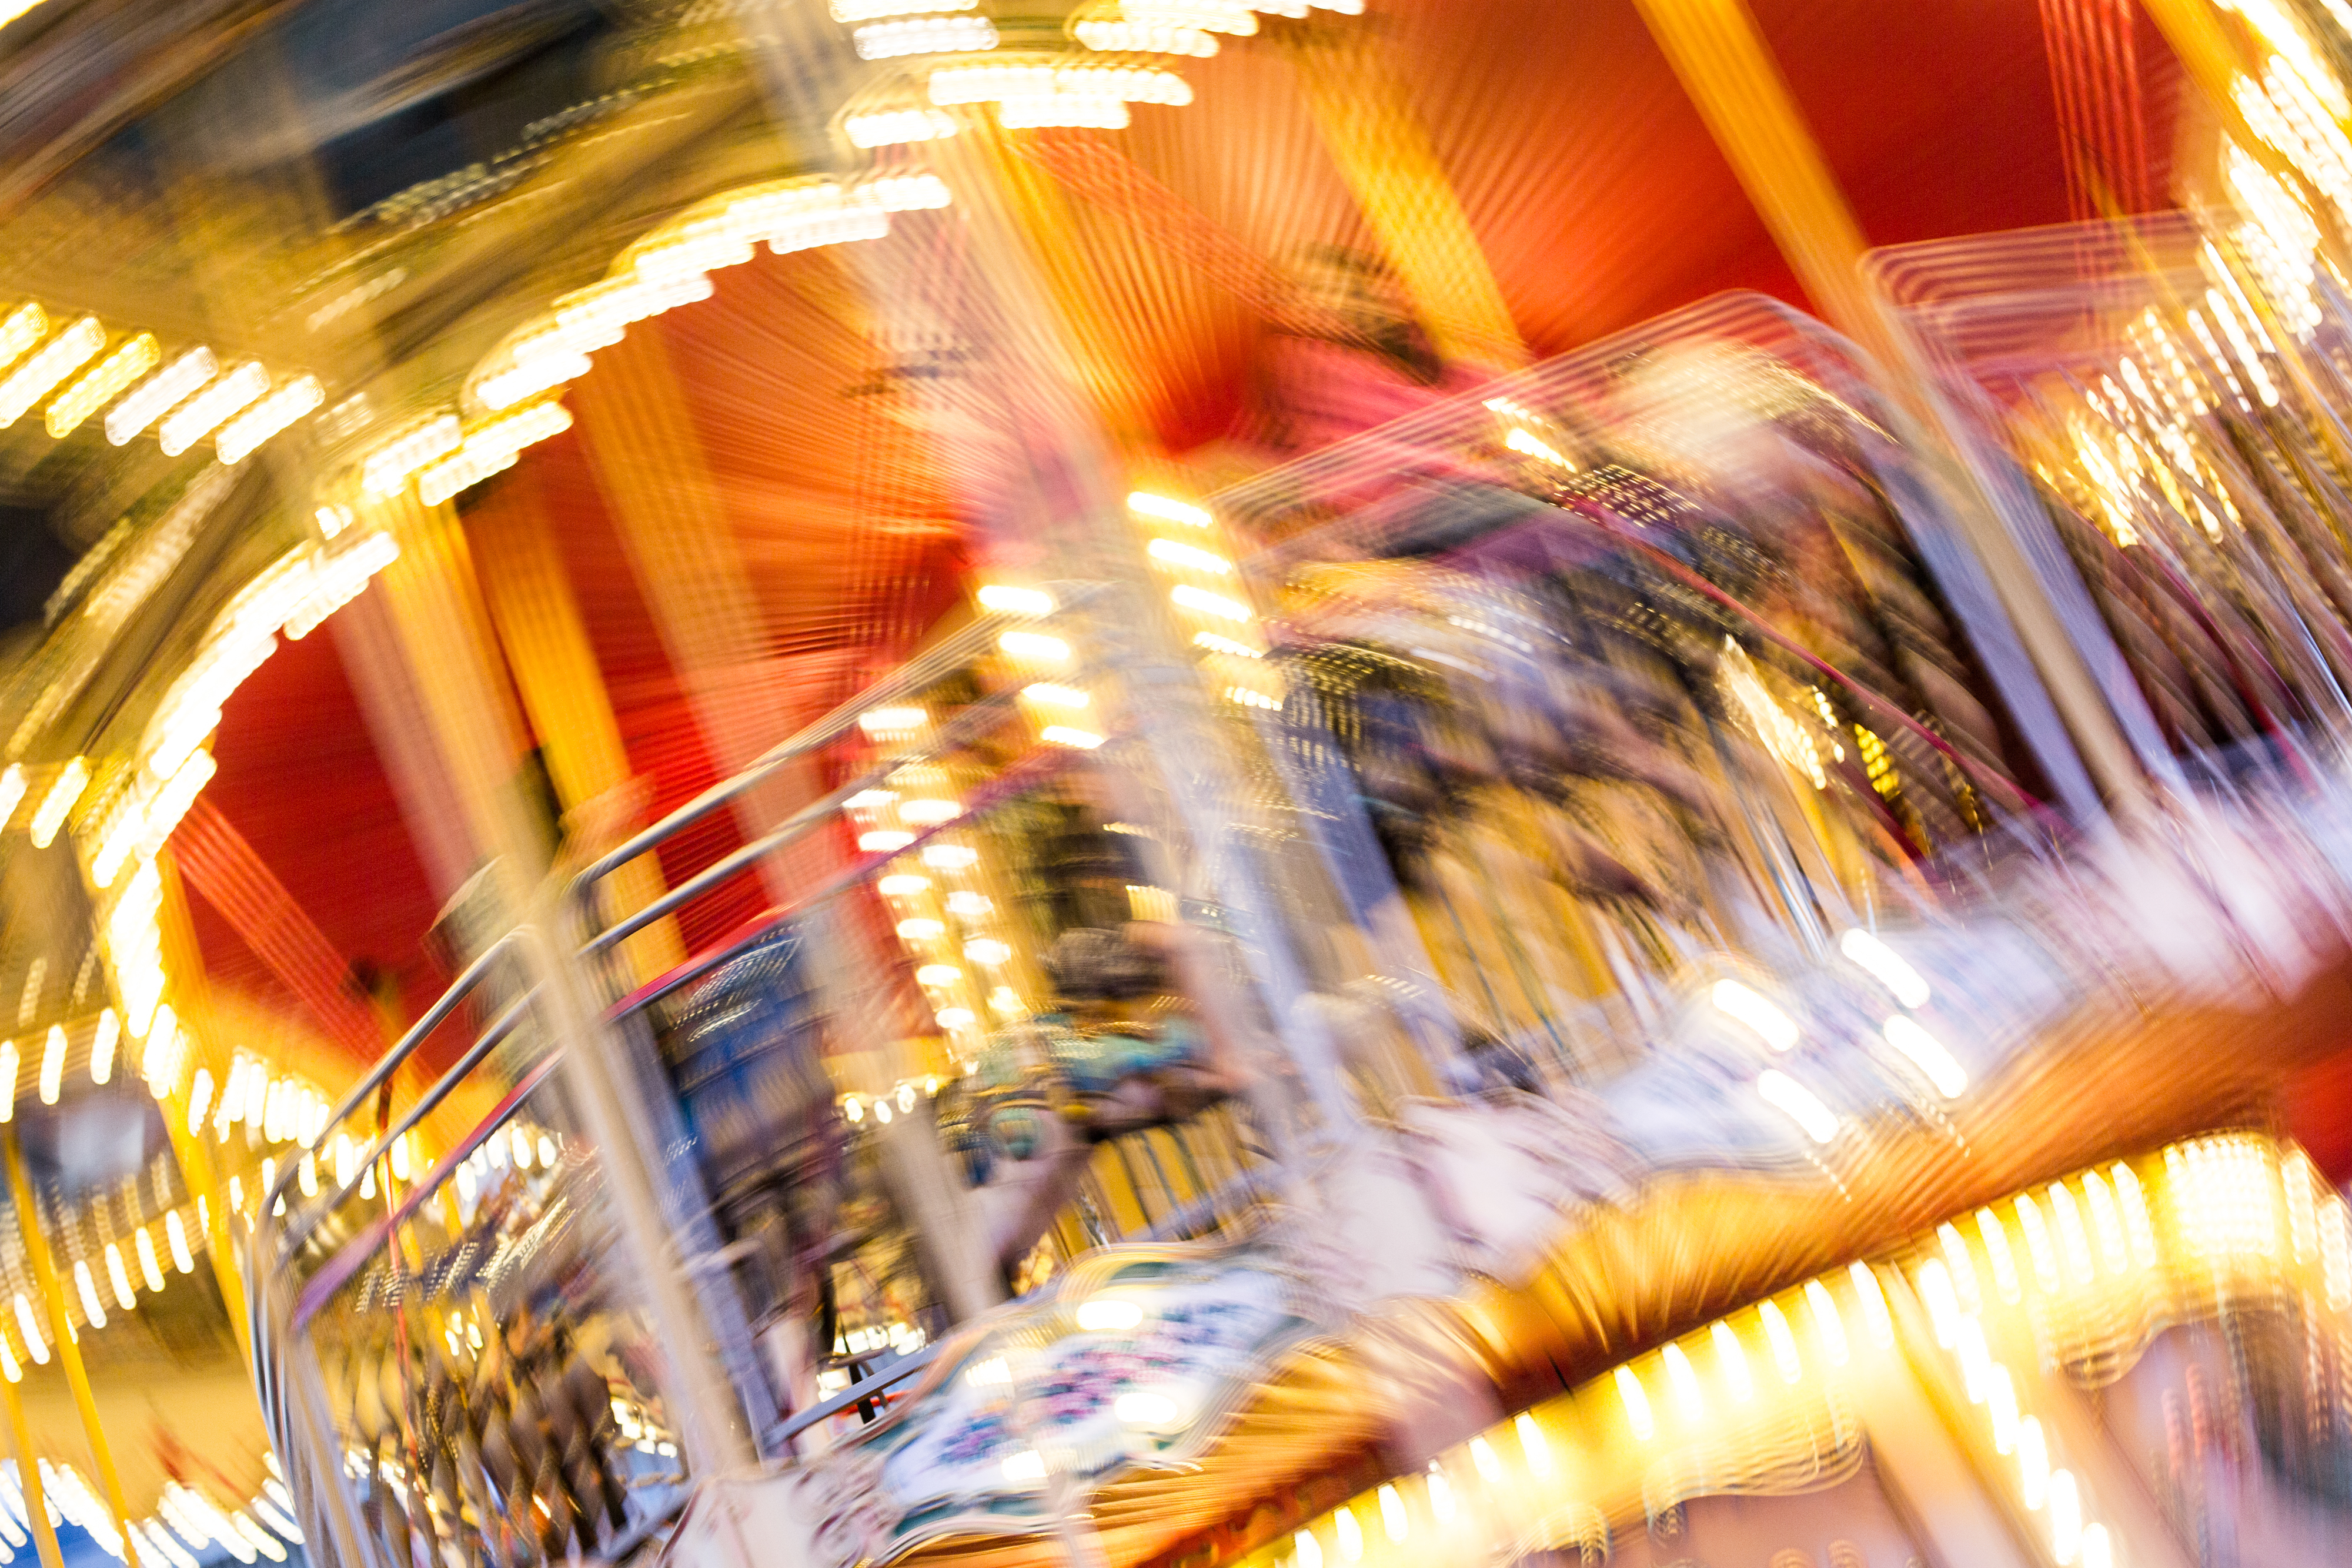 Download Crazy Blurred Carousel at Night FREE Stock Photo